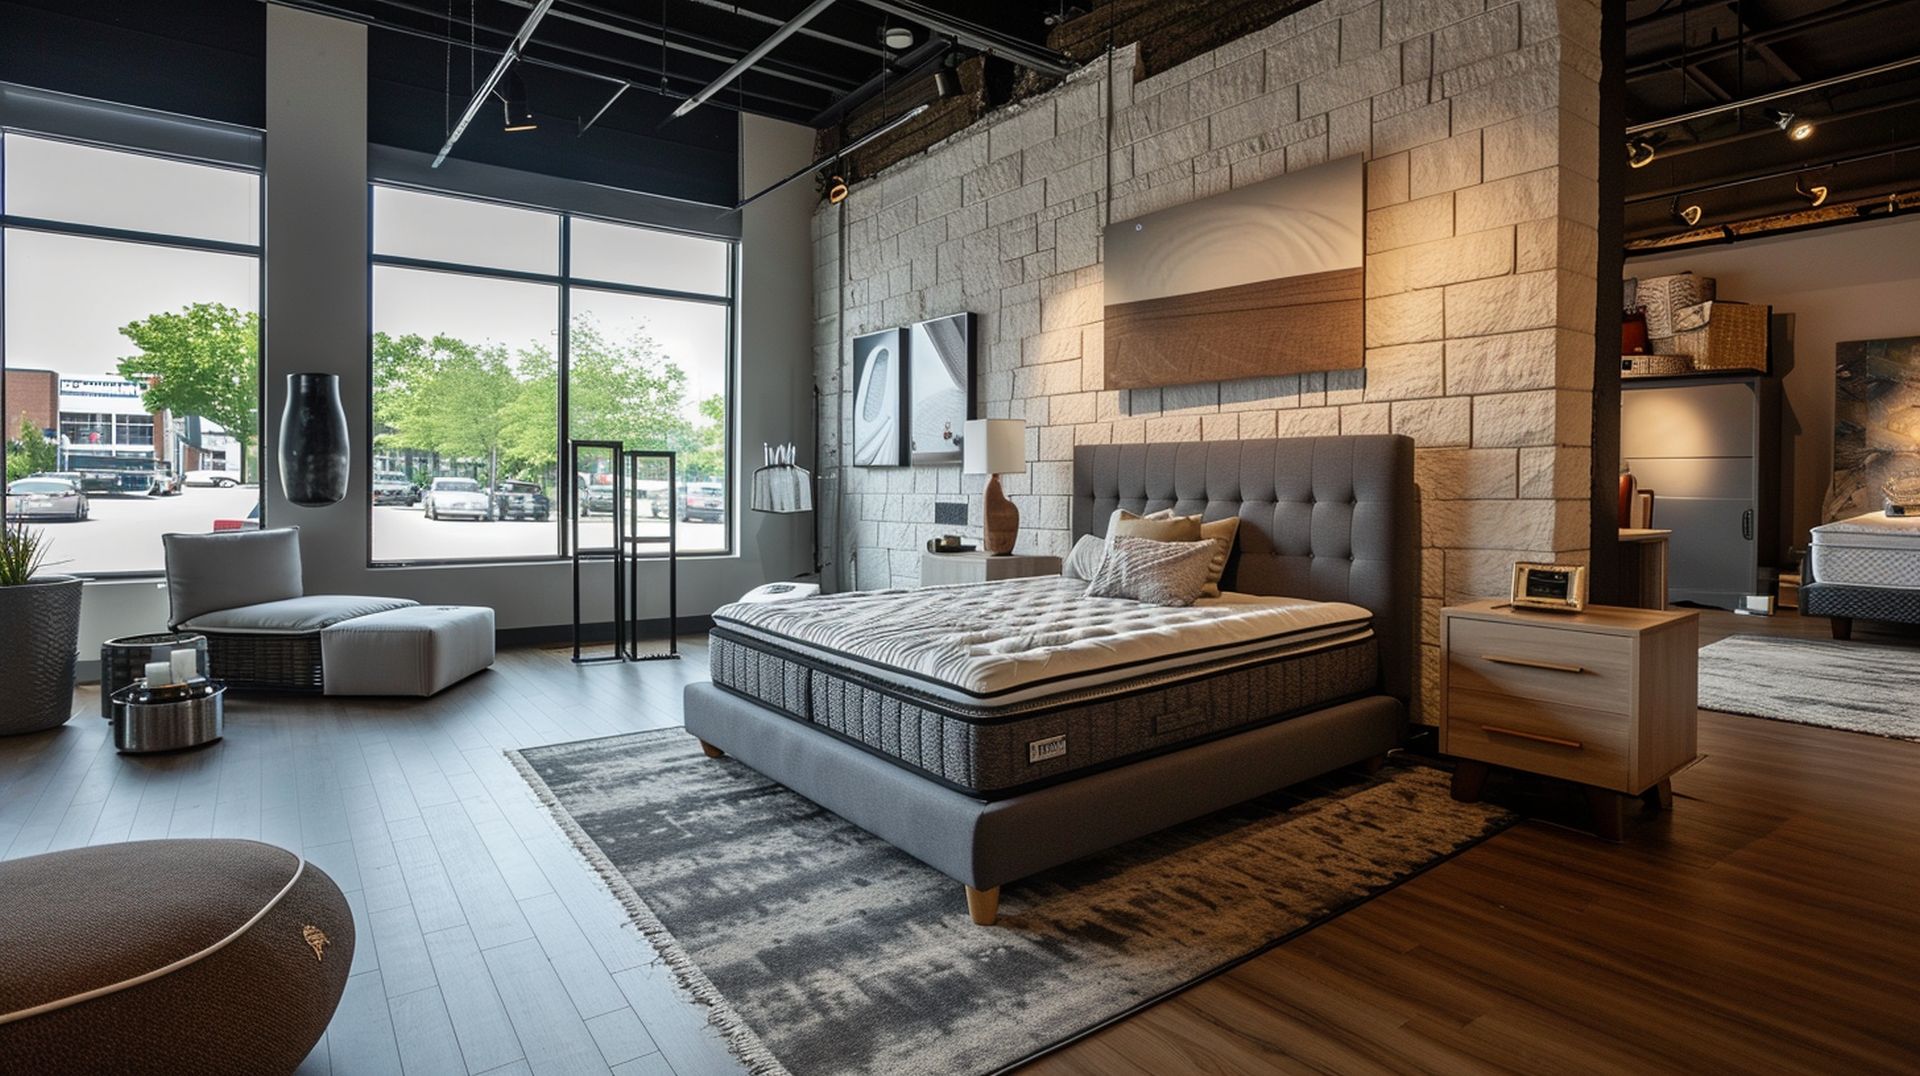 Types of mattresses at mattress dealers in Baltimore, MD